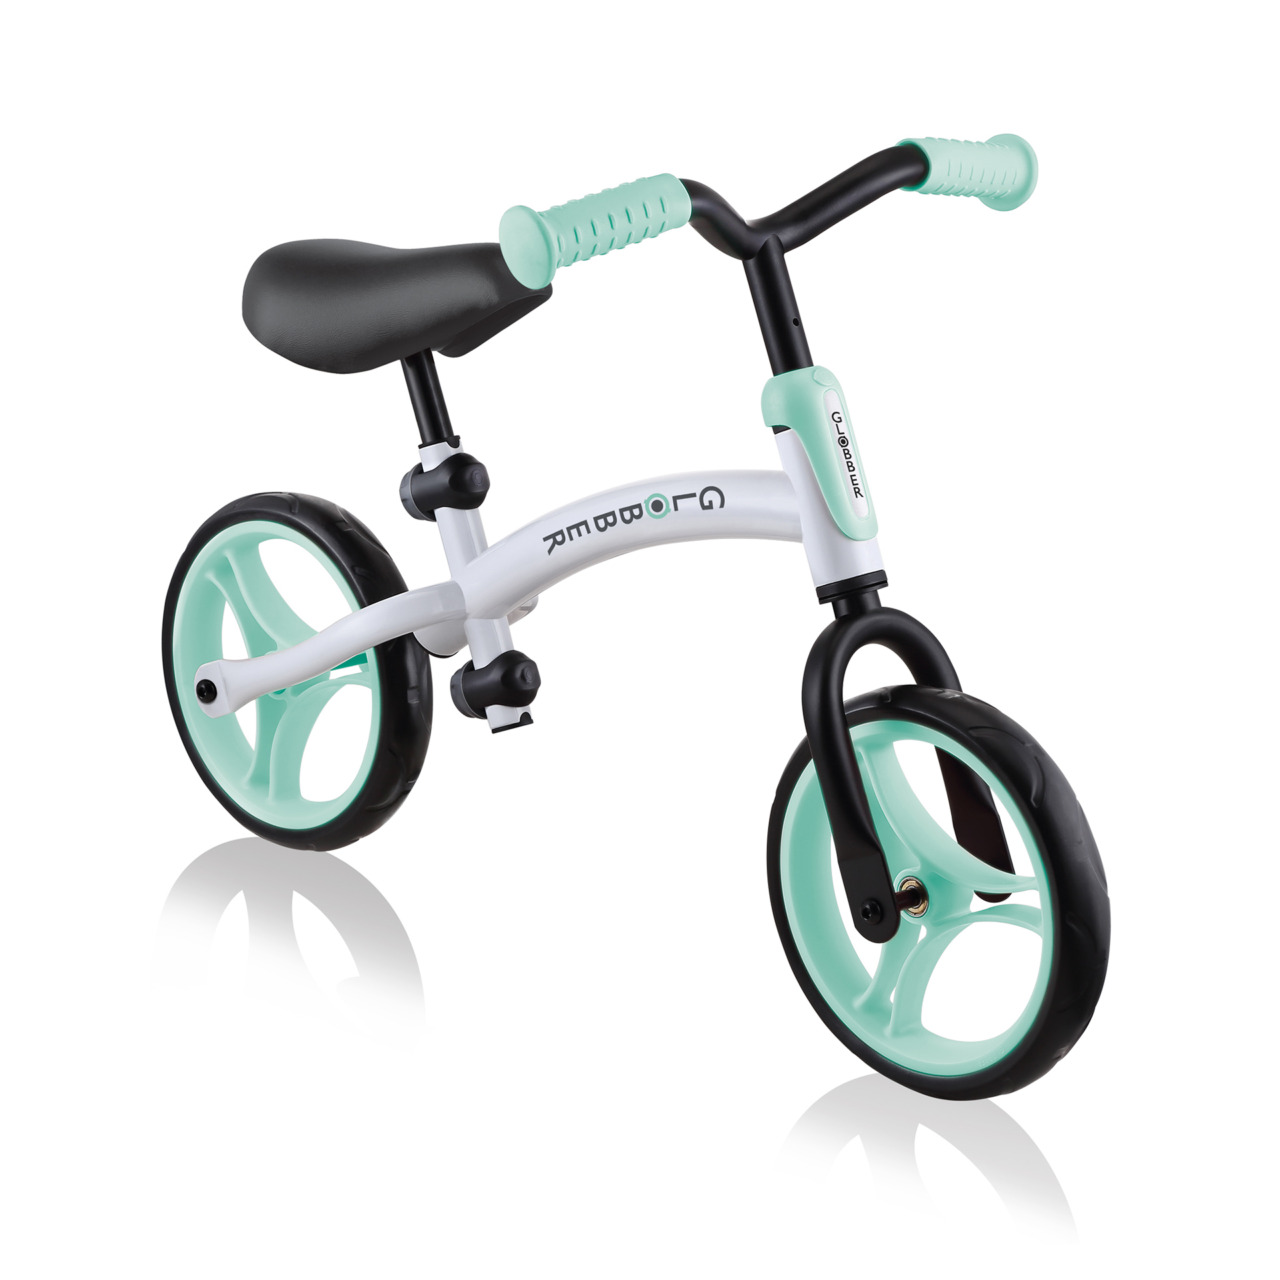 614 206 2 Best Convertible Balance Bike With Reversible Frame